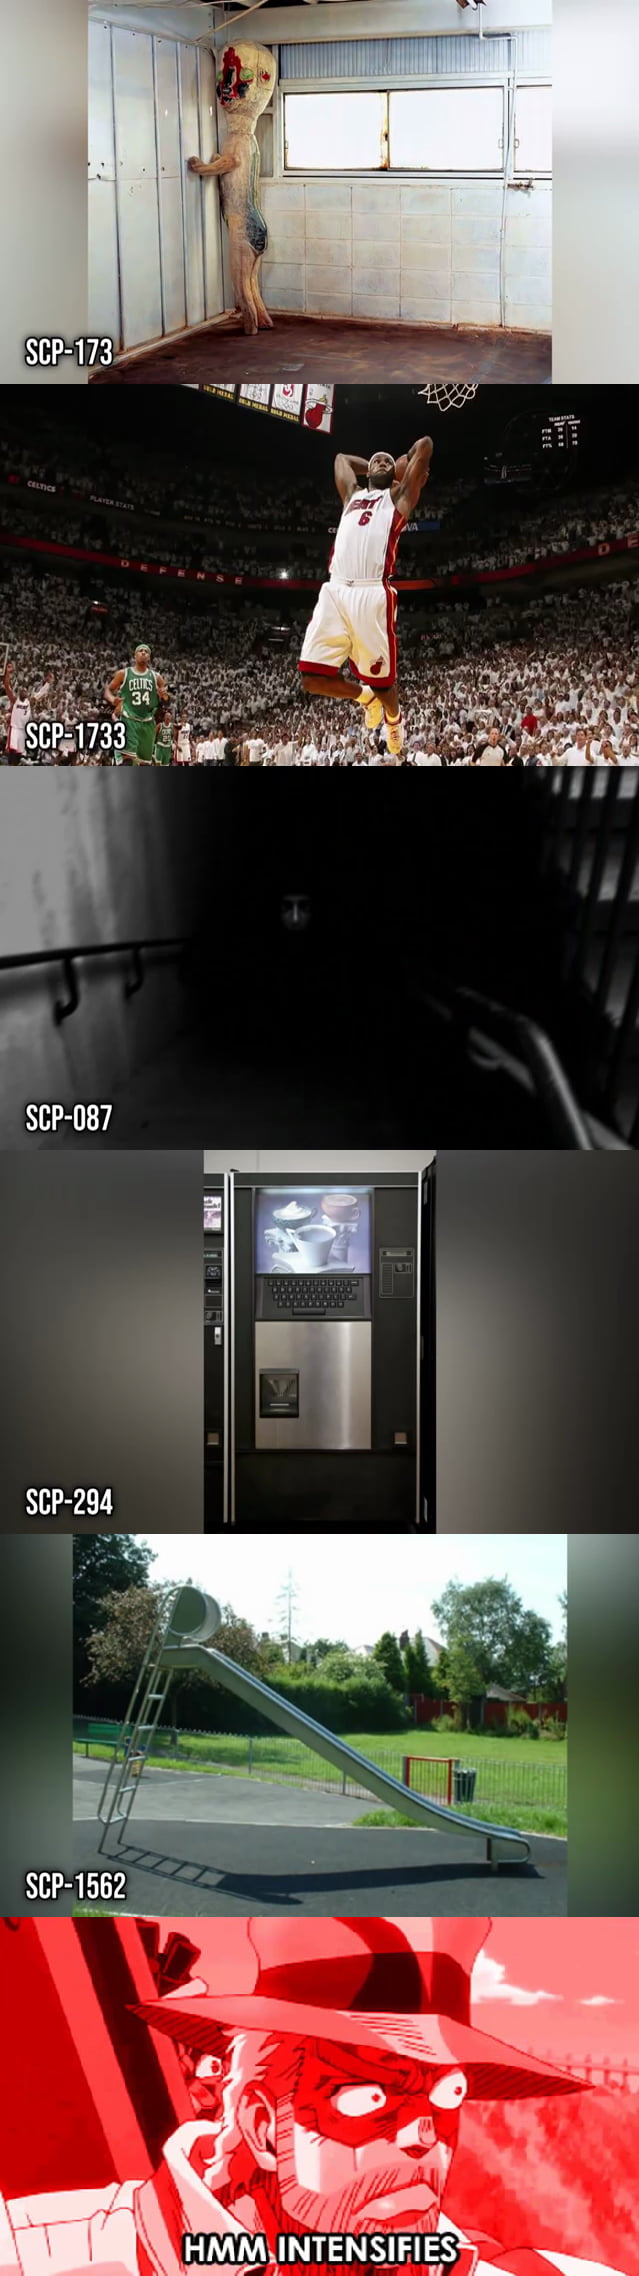 SCP-1733 is at 1733 upvotes : r/SCP